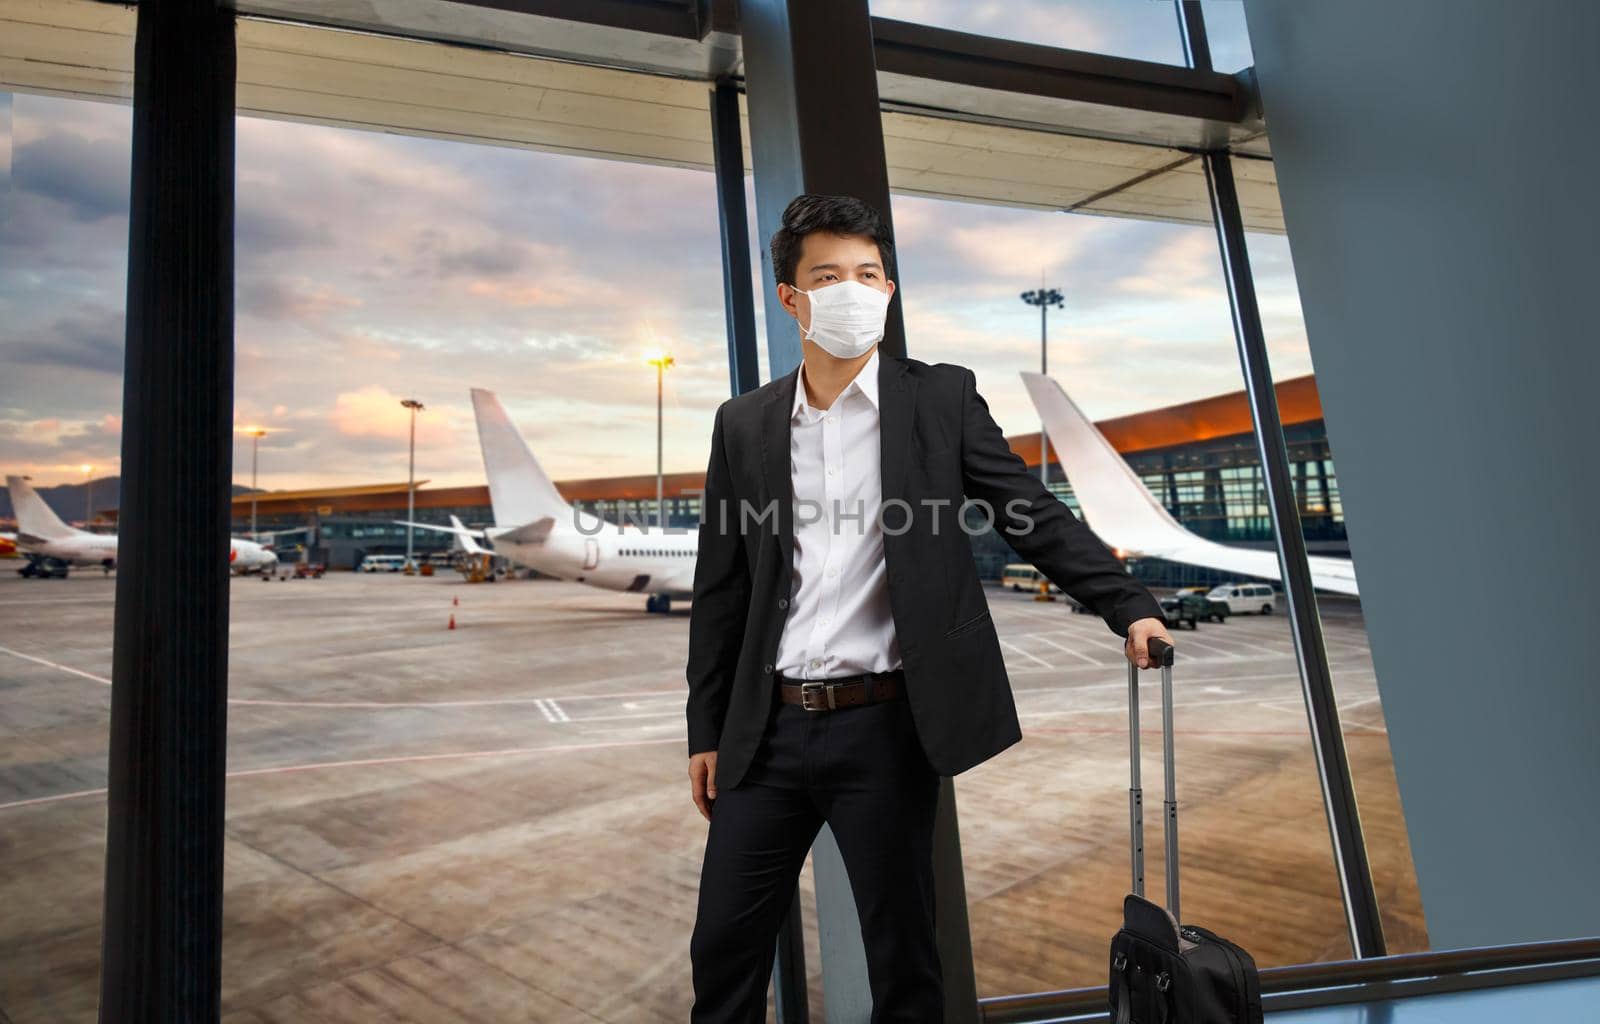 New normal lifestyle ,Air travellers must wear masks to protect covid-19